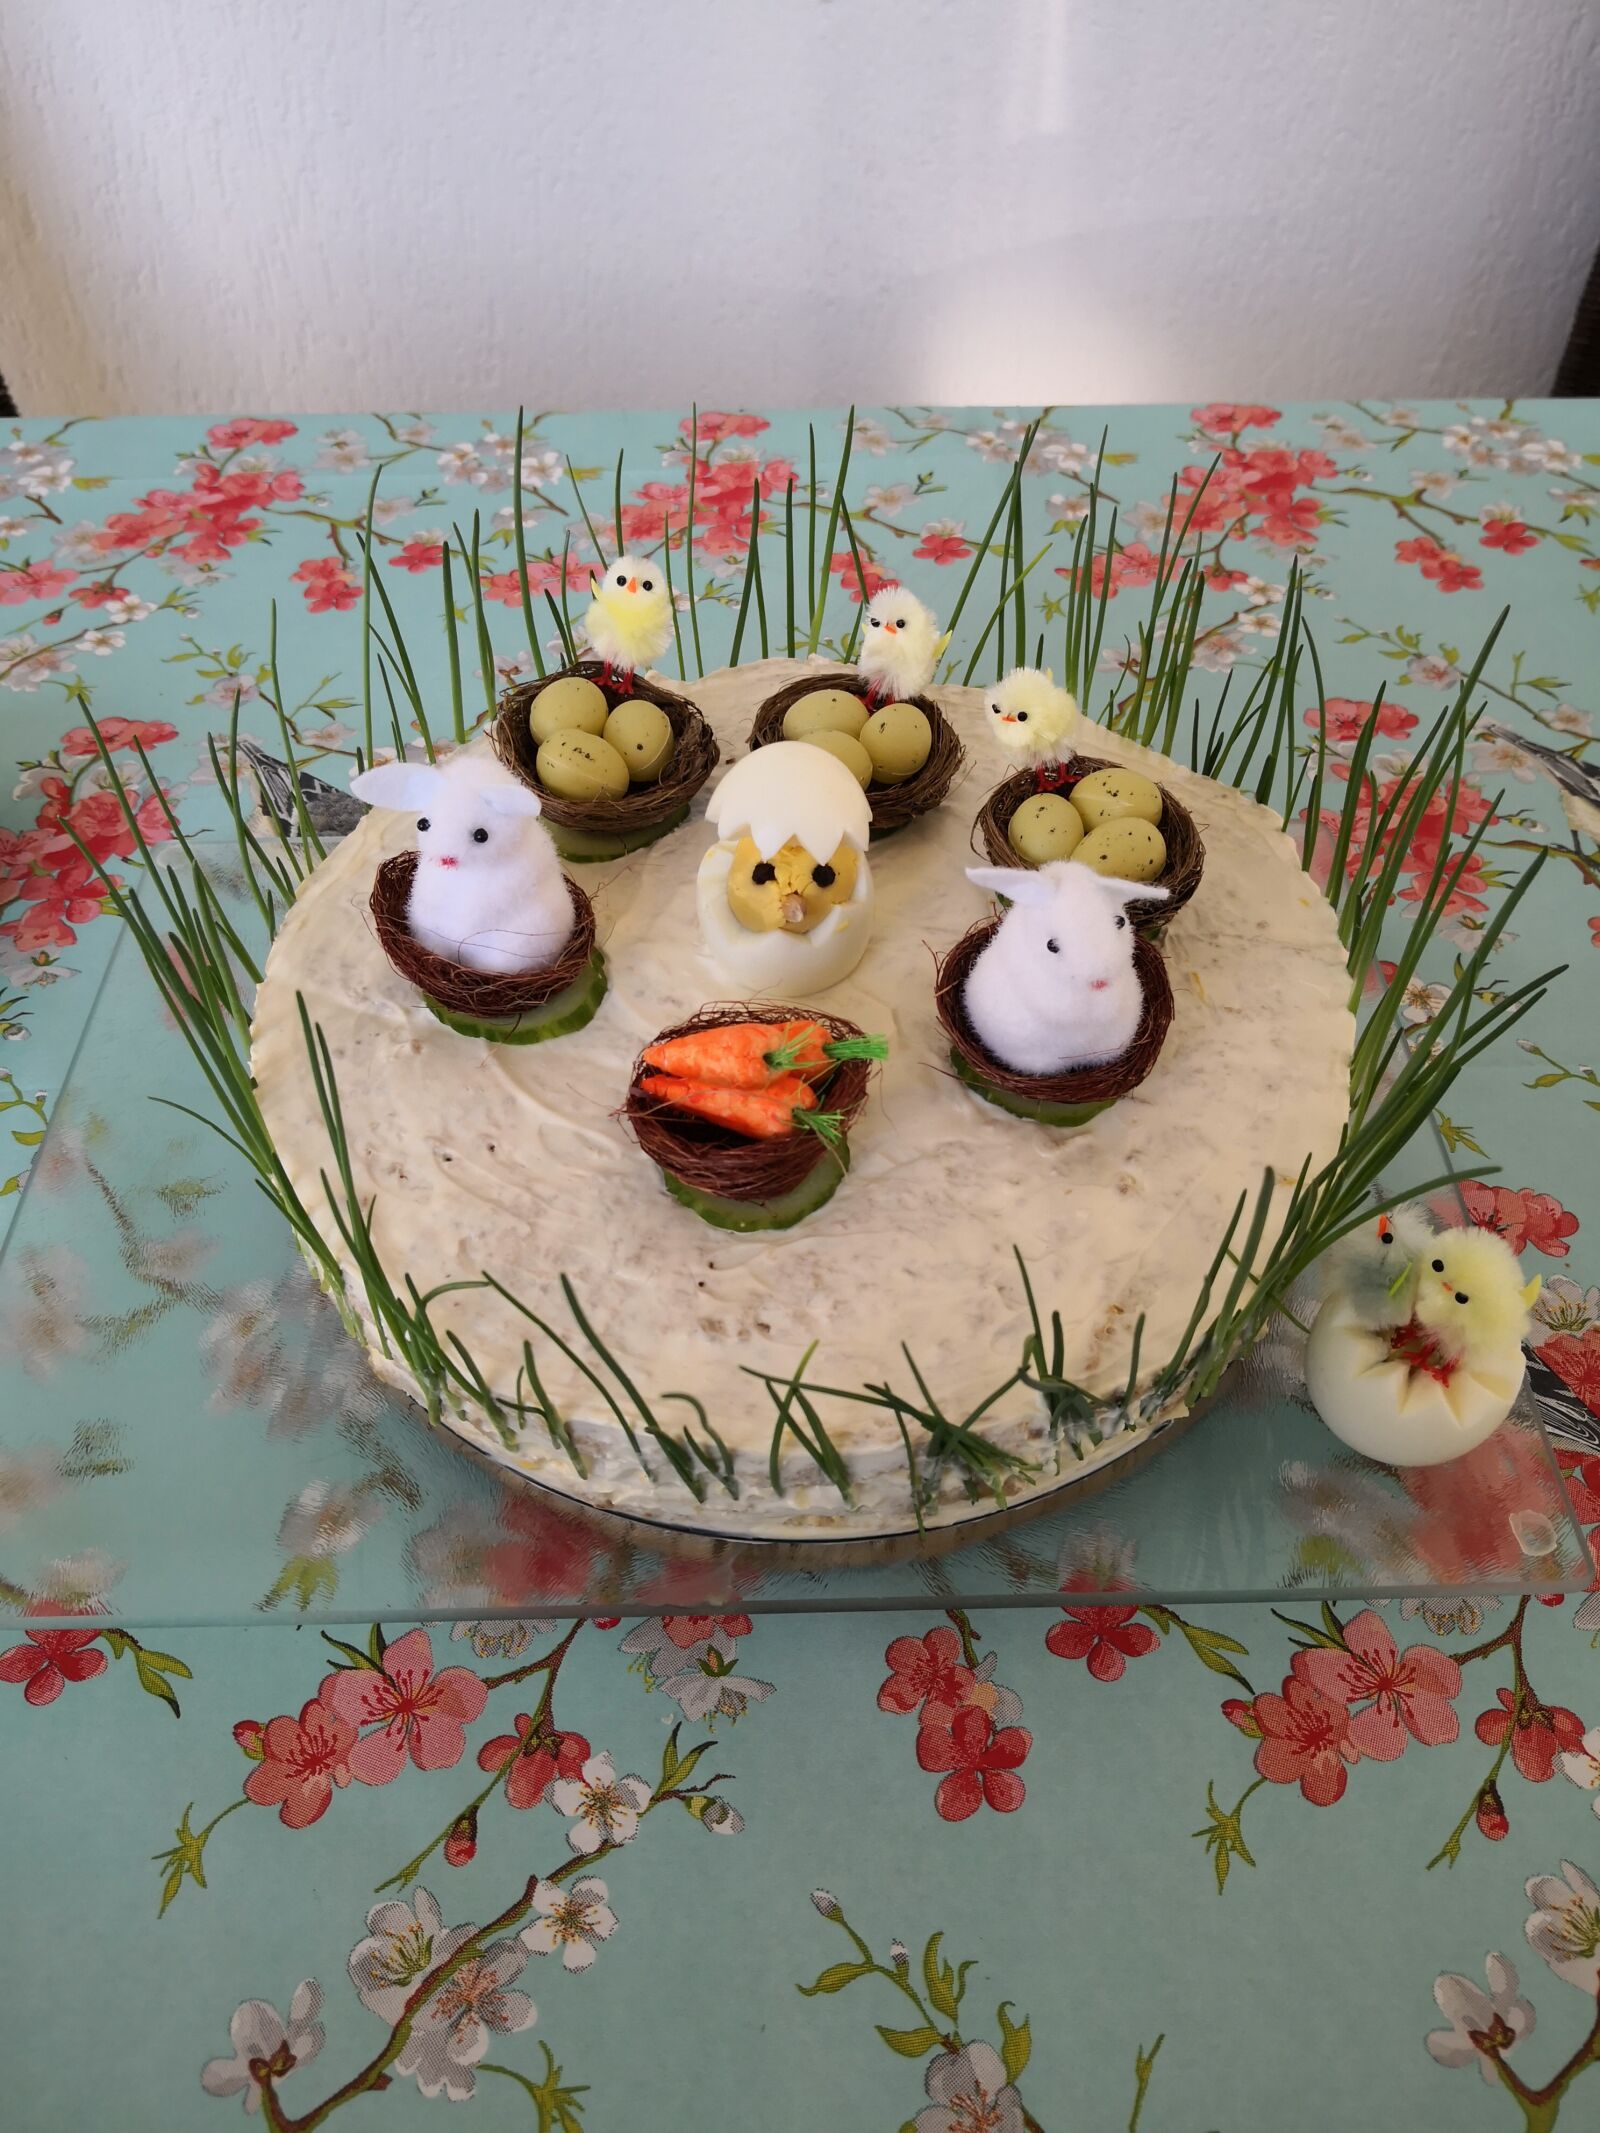 HUAWEI Mate 10 Pro sample photo. Broodtaart, easter, lunch photography